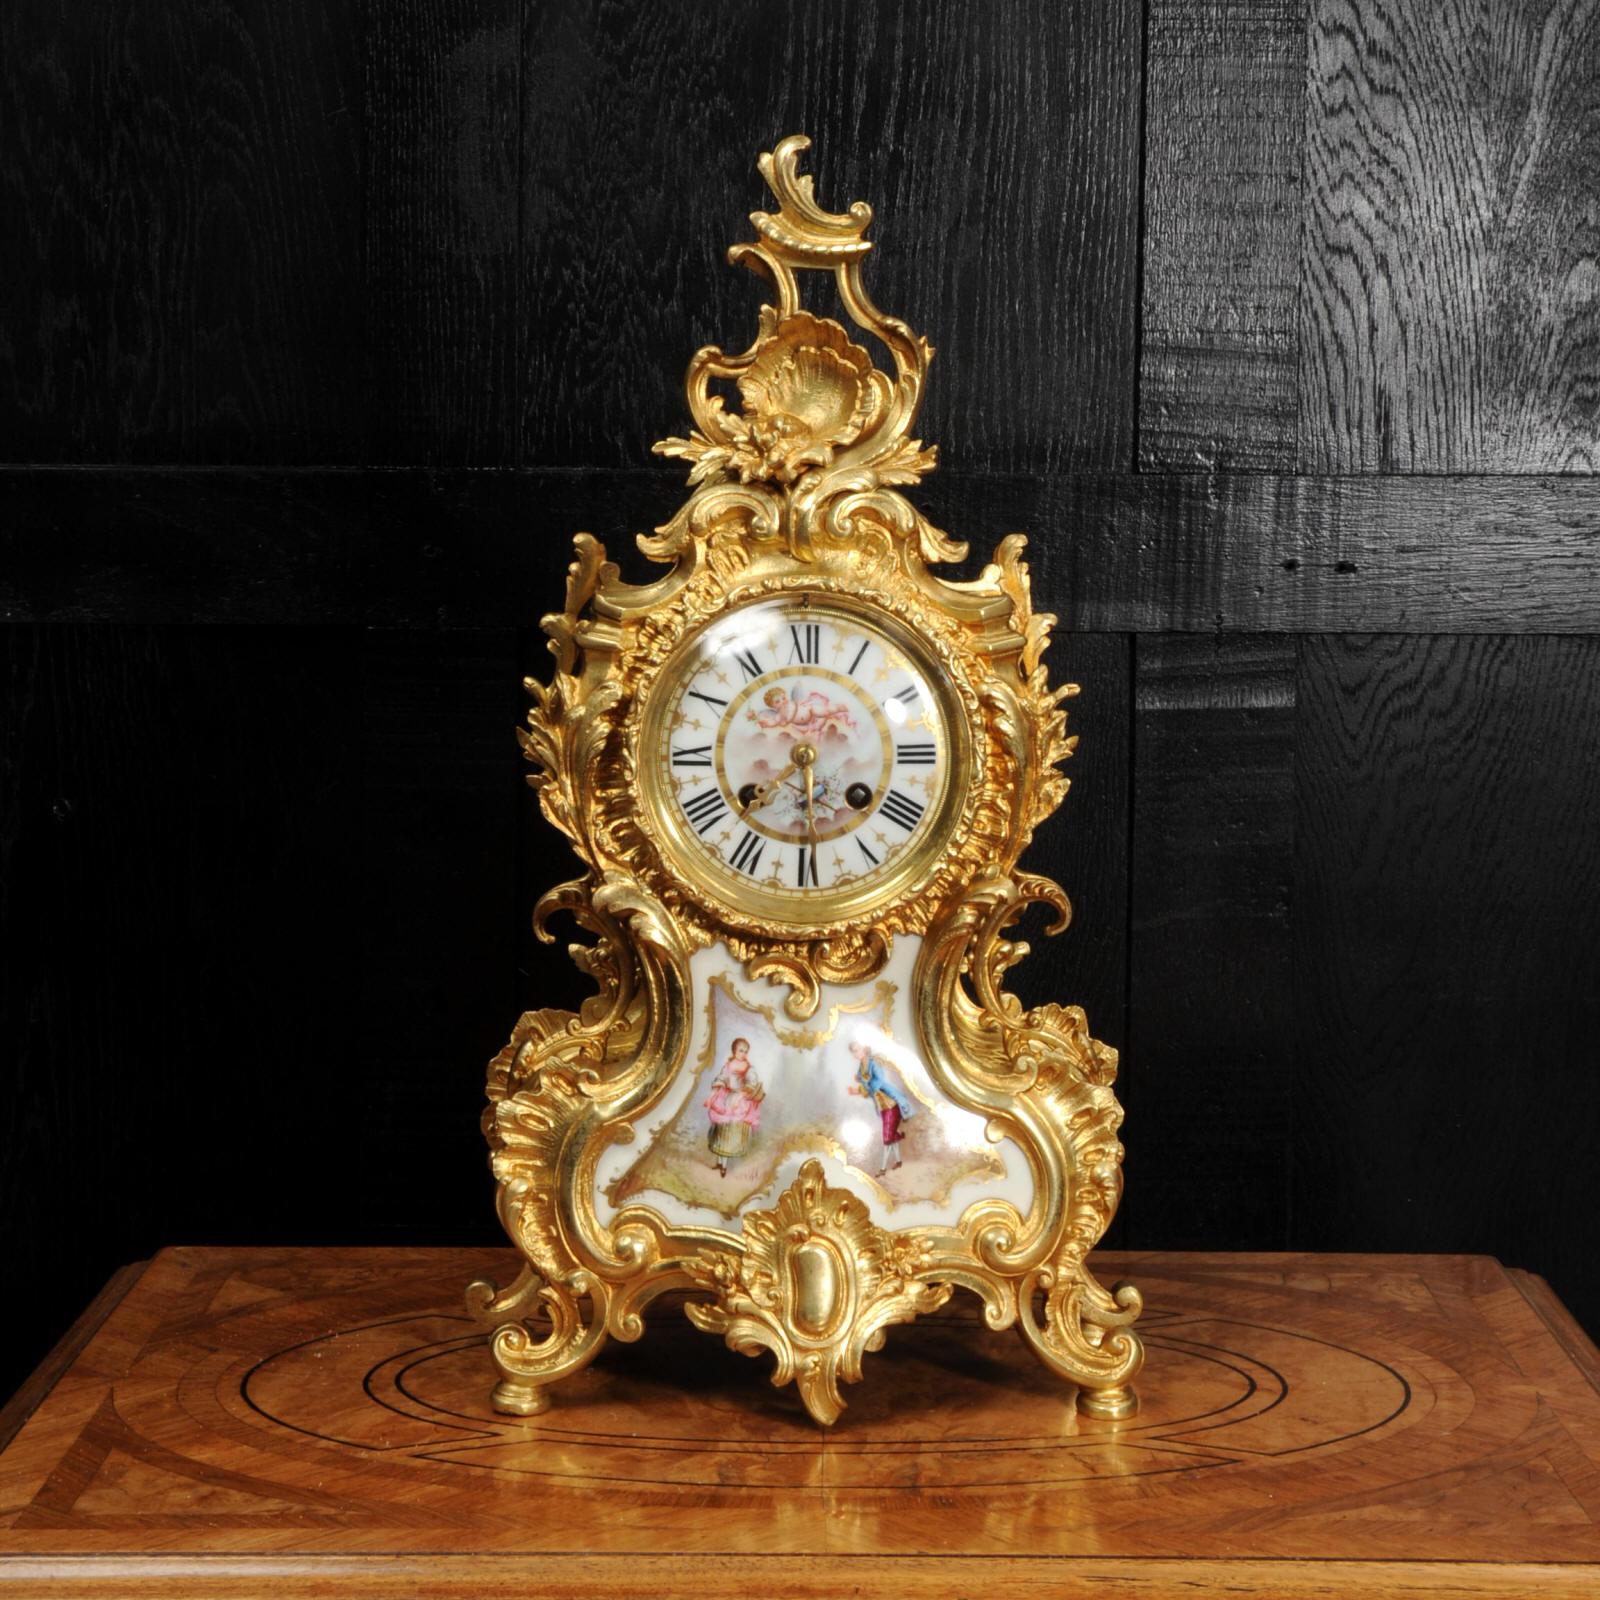 A large and beautiful antique French Rococo clock, circa 1900. Beautifully made in finely gilded bronze and mounted with exquisite Sèvres style porcelain. Porcelain has a white ground with panels delicately painted with scenes. Below the dial the